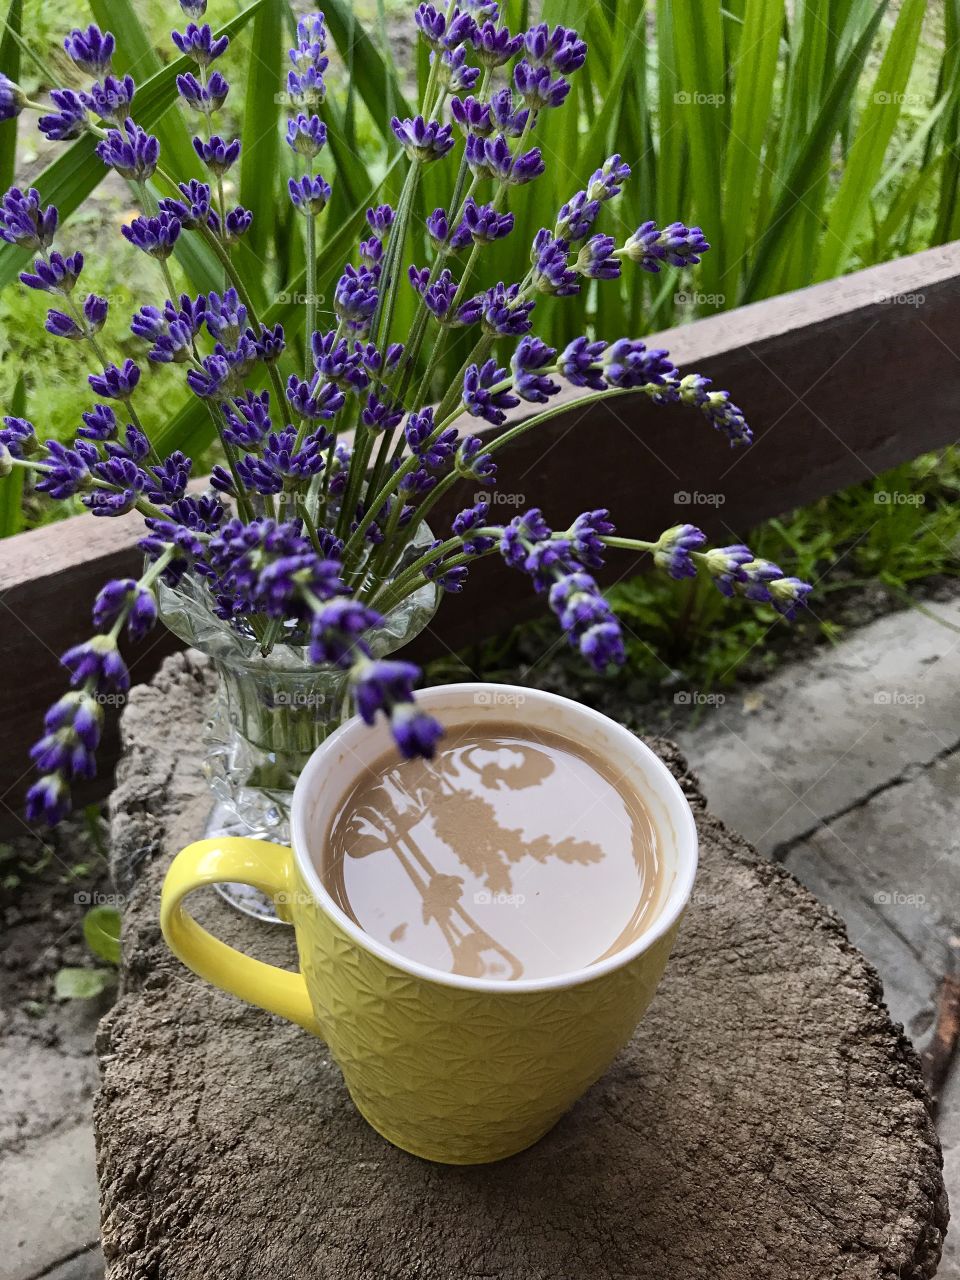 Sometimes all you need is a cup of coffee and flowers to feel better!